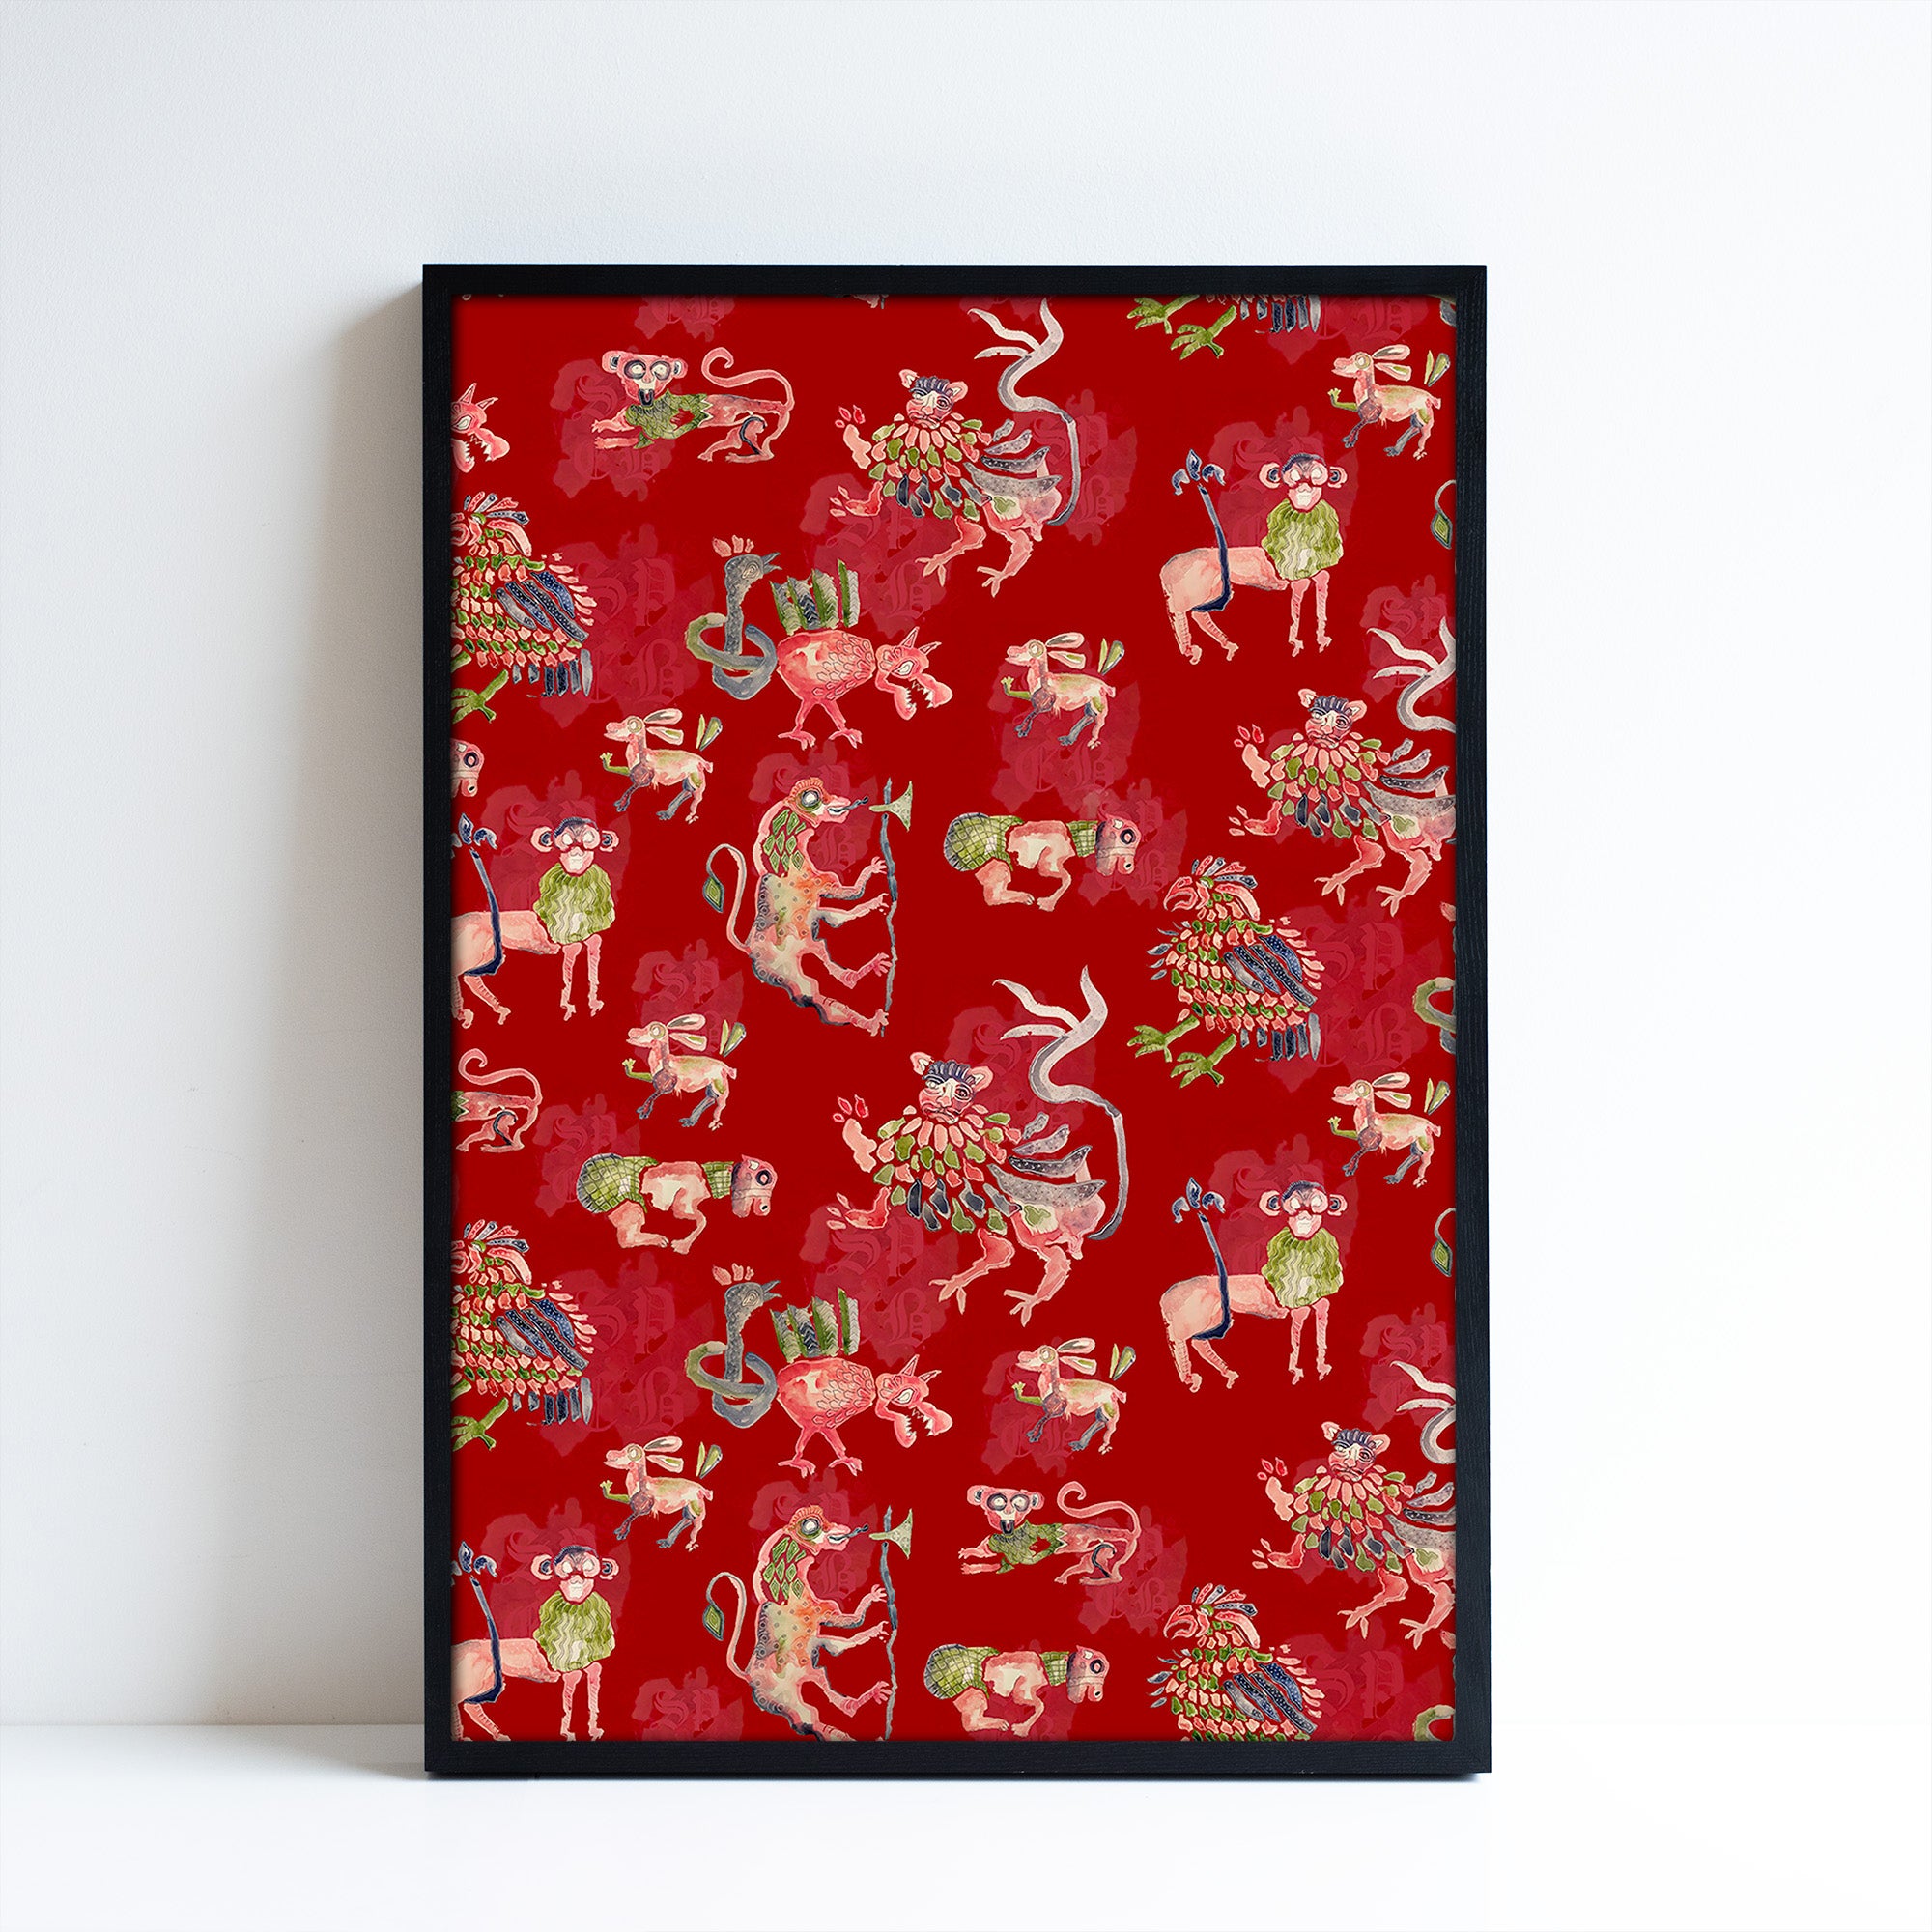 Framed print of pattern design by Sarah-Joy Ford. Lots of mythical creatures against a red backgound.